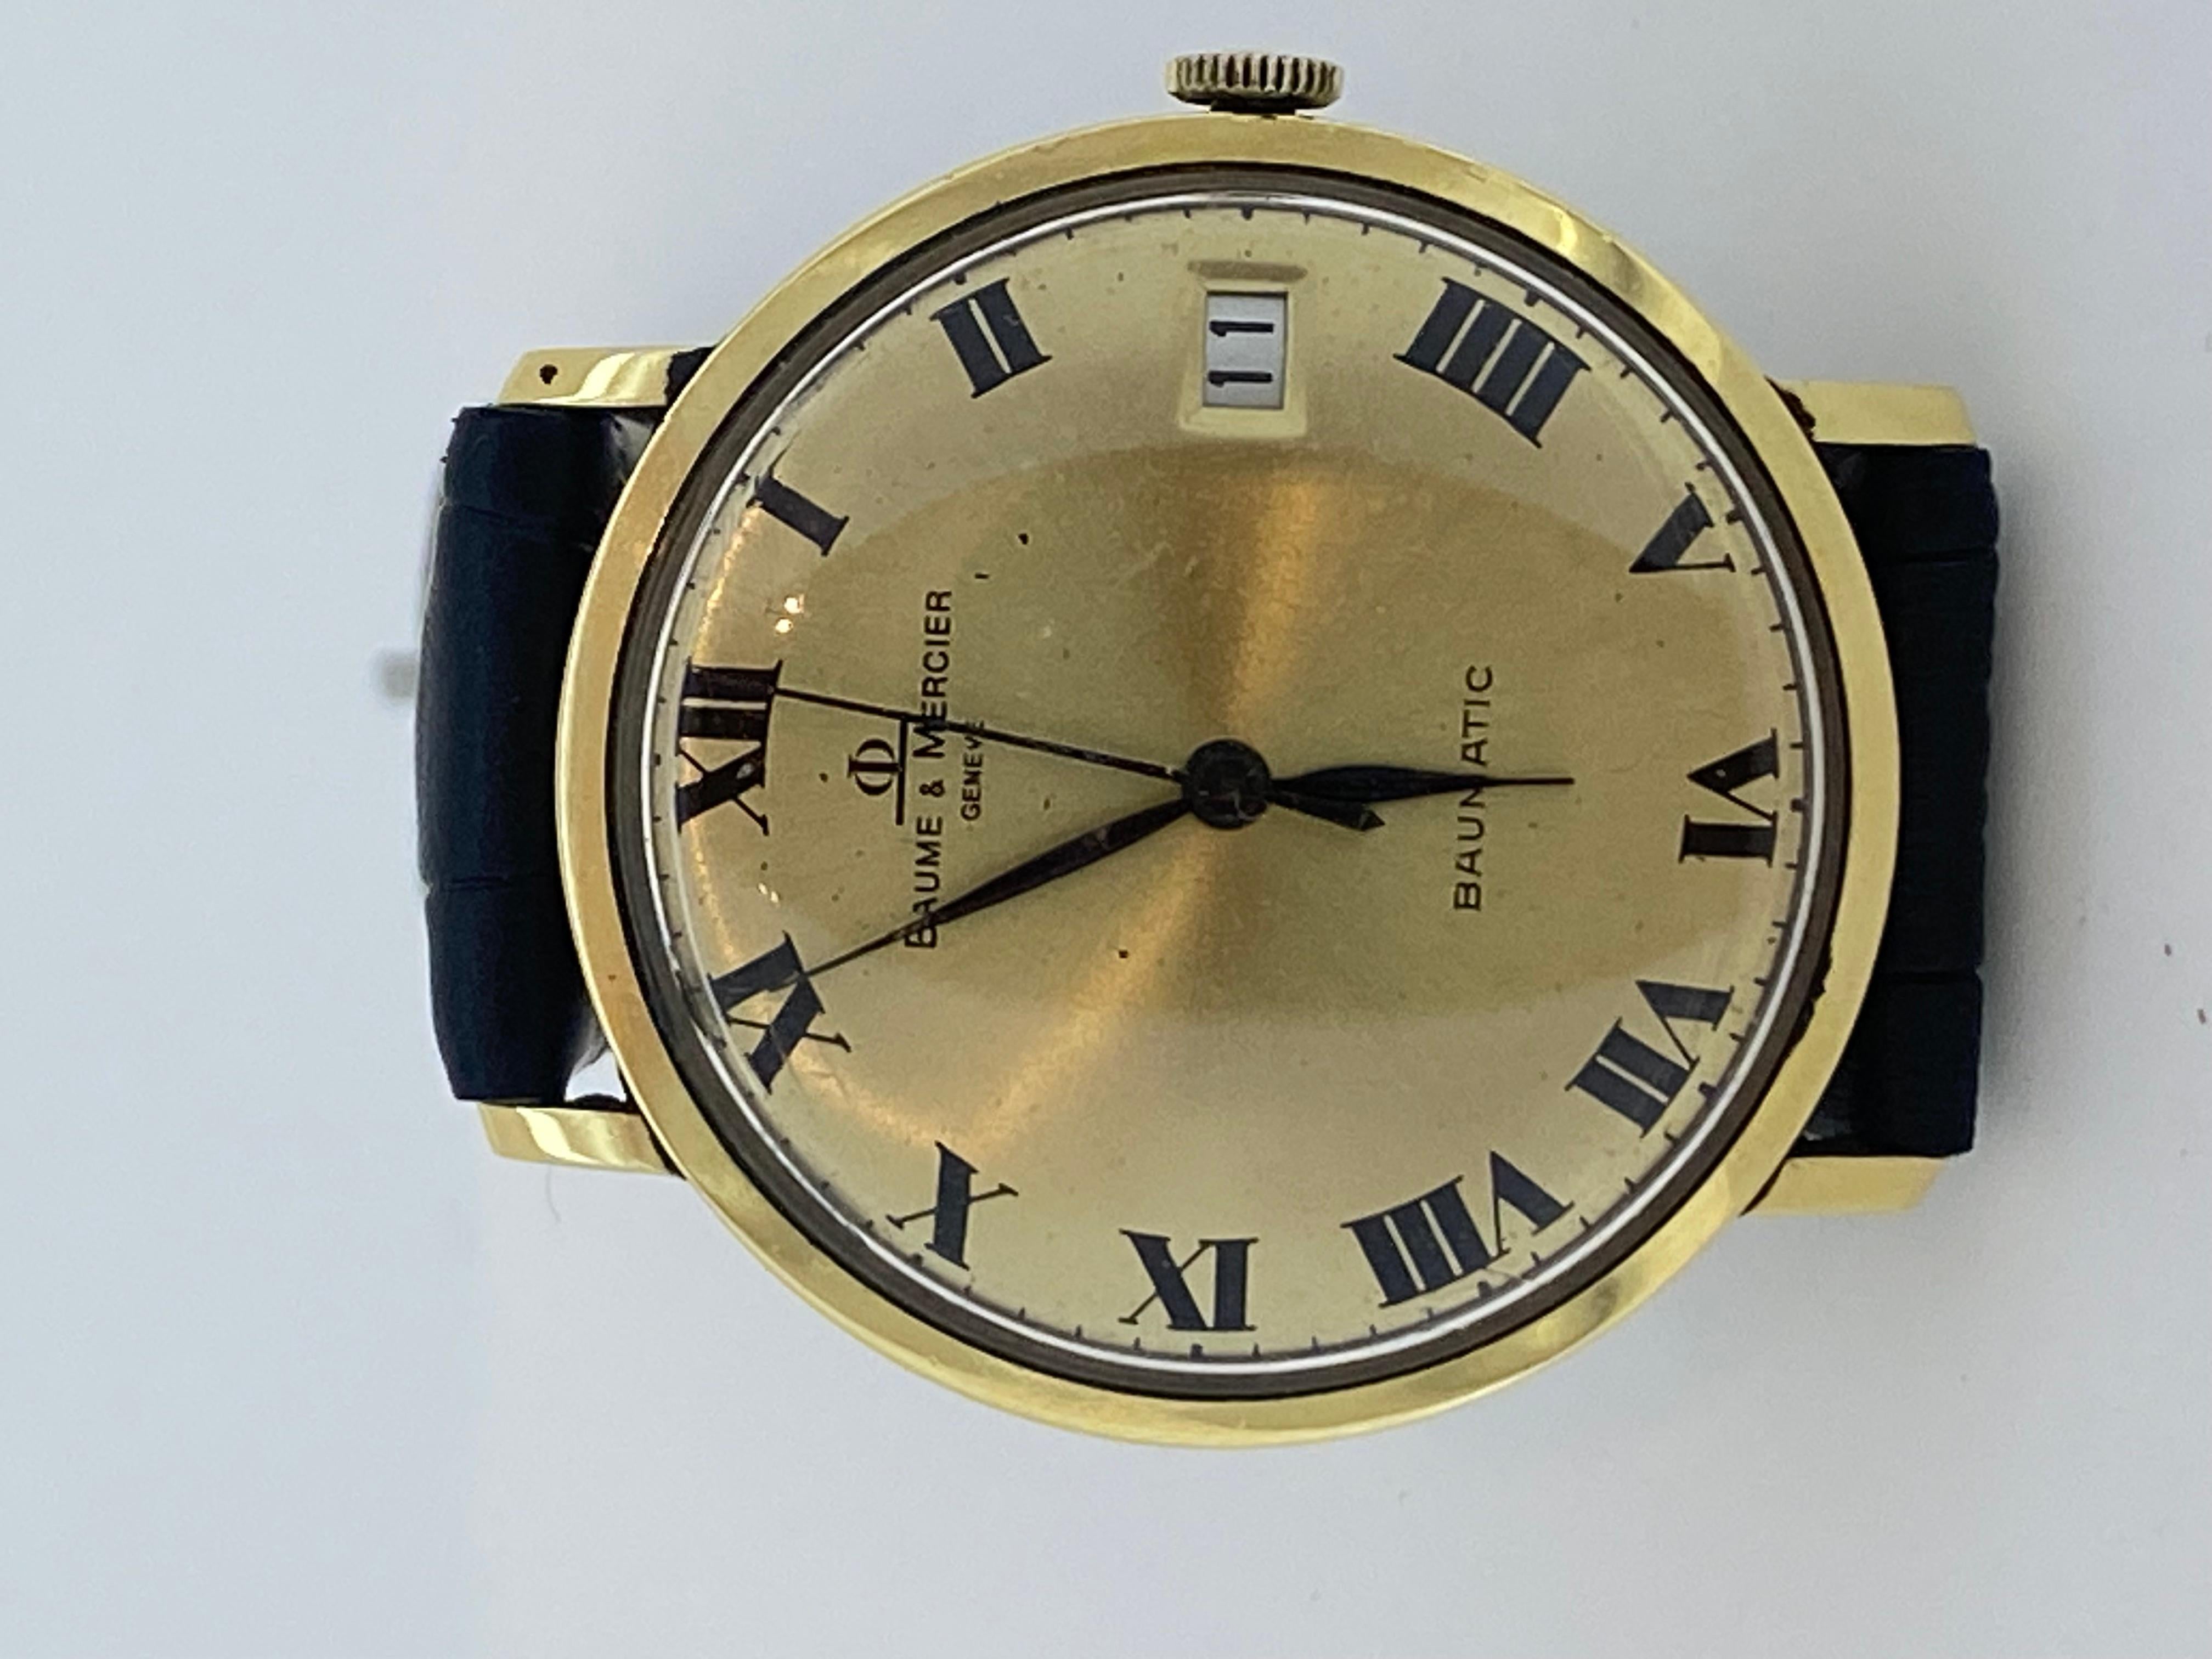 Performed in 18K Solid Gold, 

this sophisticated timepiece 

by Swiss luxury watch brand Baume & Mercier 

dates back to 1970’s, 

yet it’s in beautiful condition & in excellent working order

 

It's very rare, due to its in-house mechanical